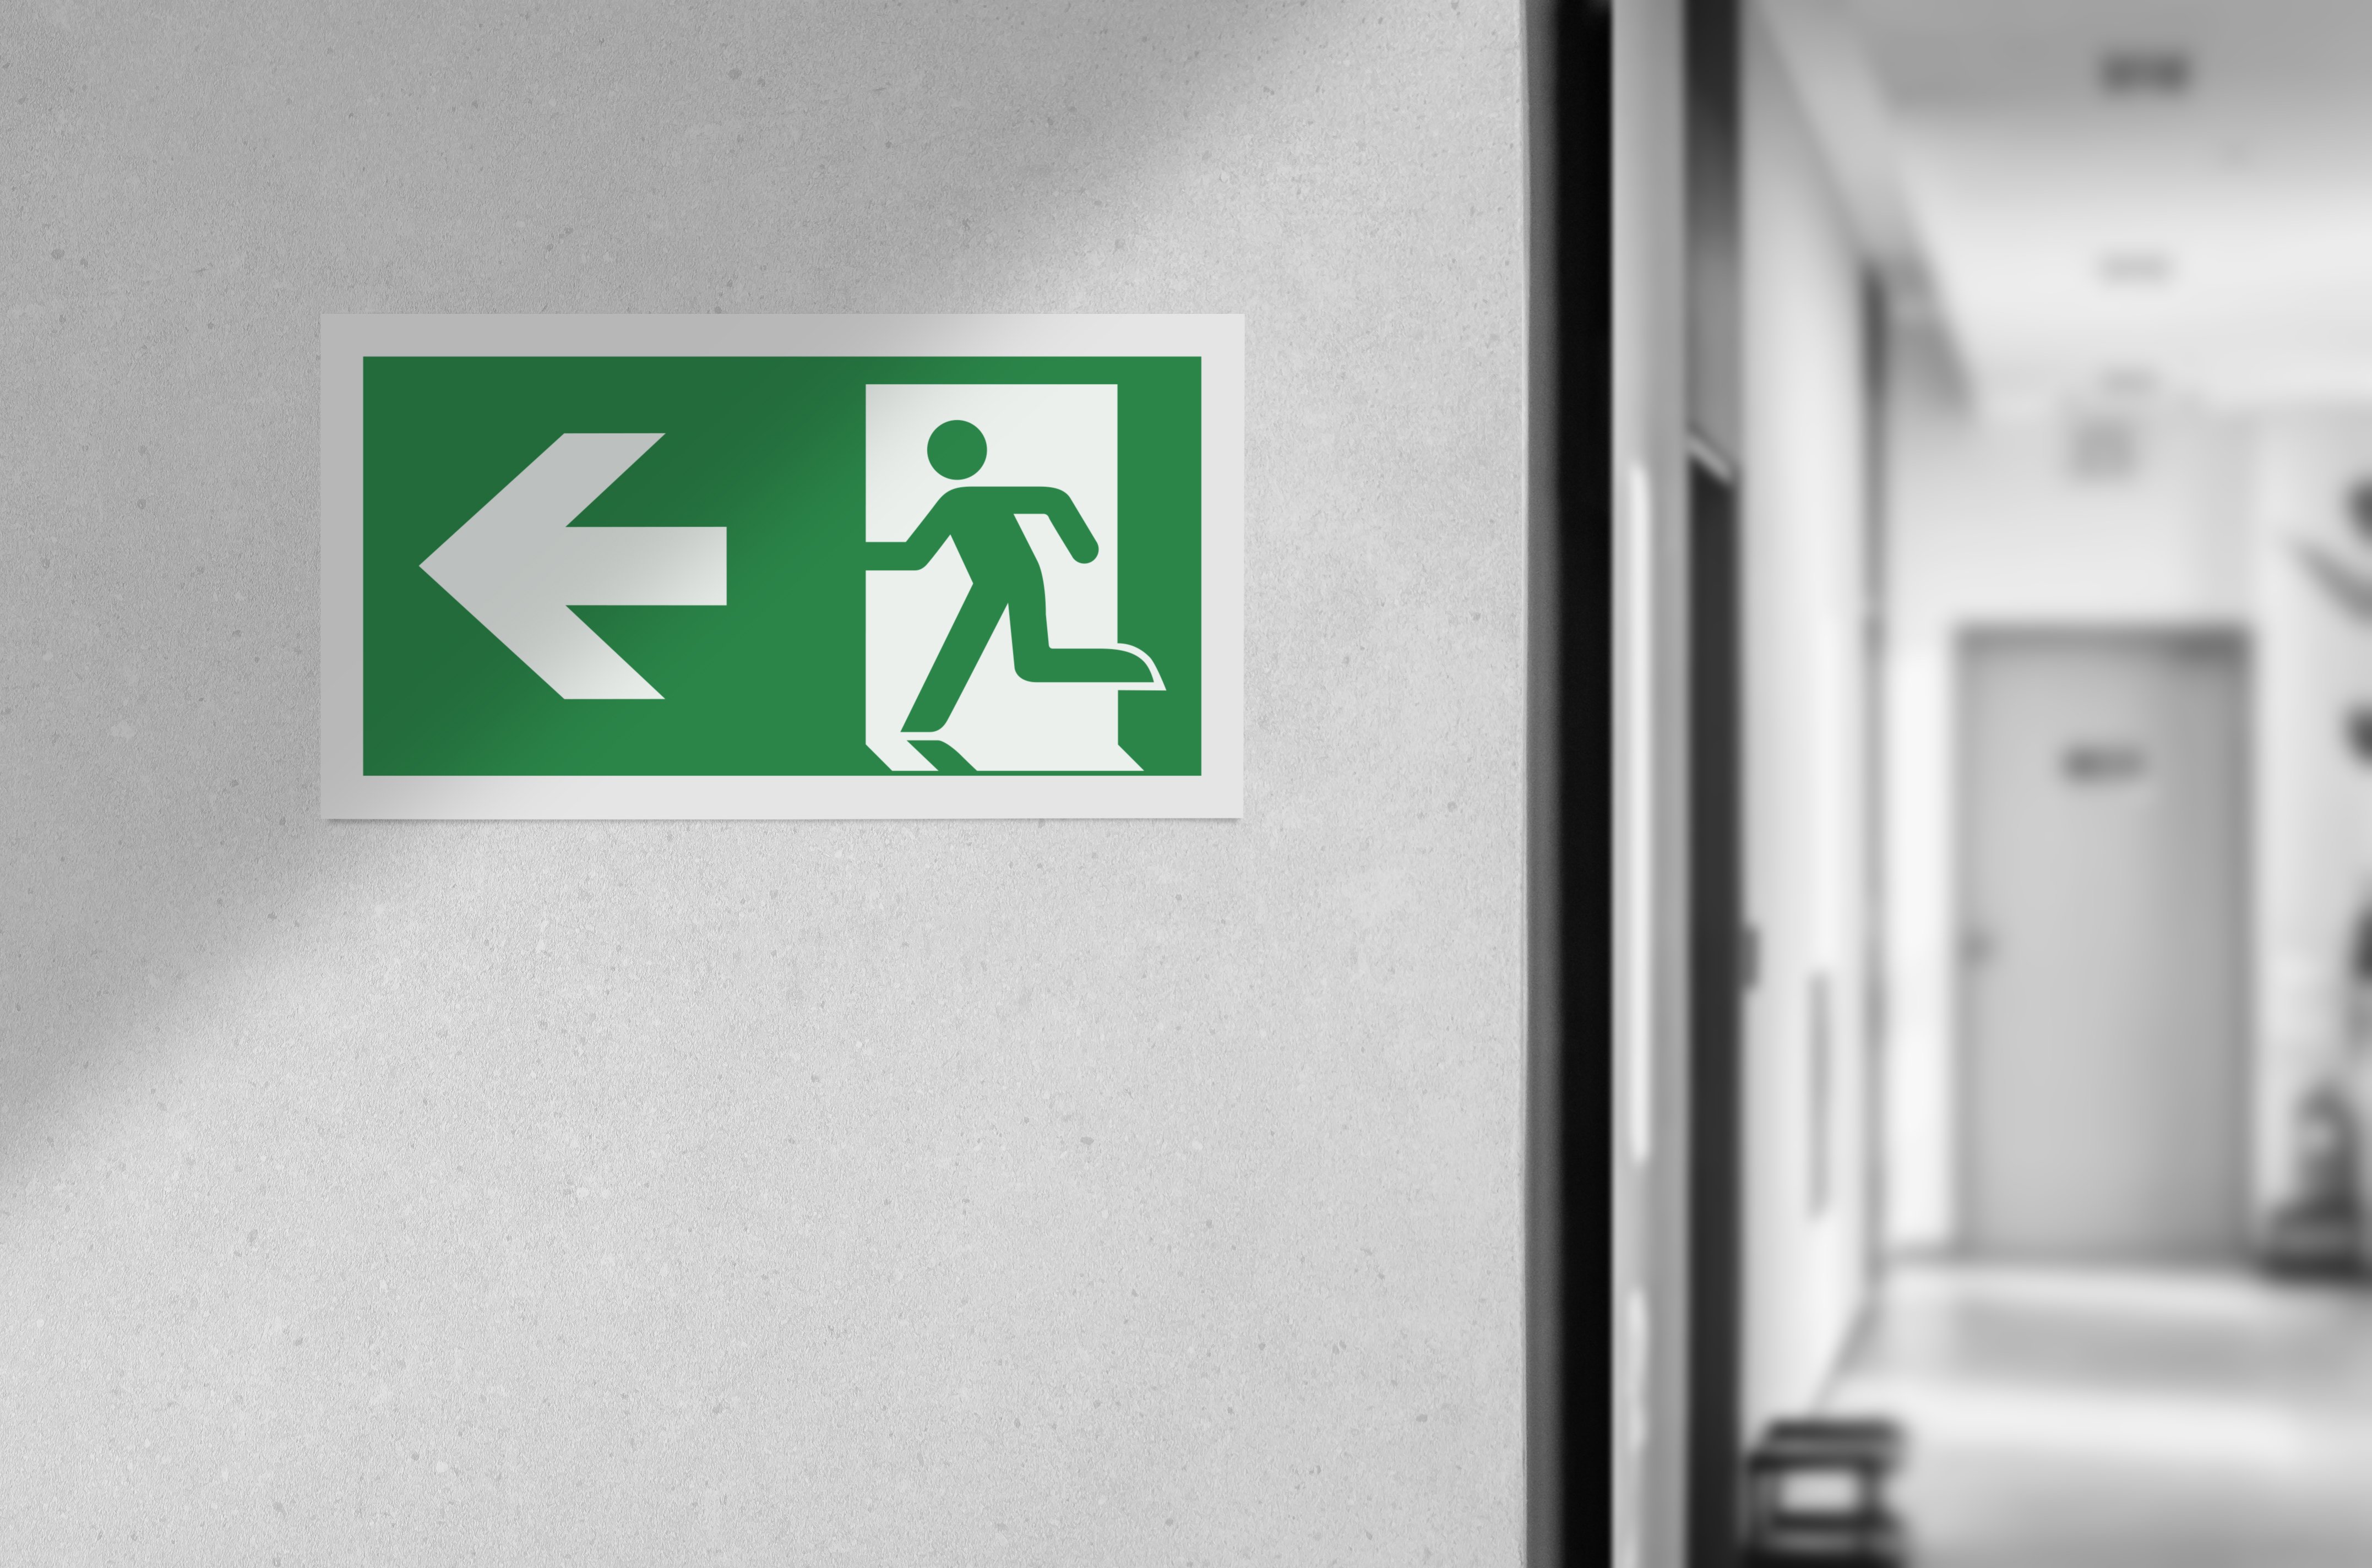 emergency lighting solutions and products for offices